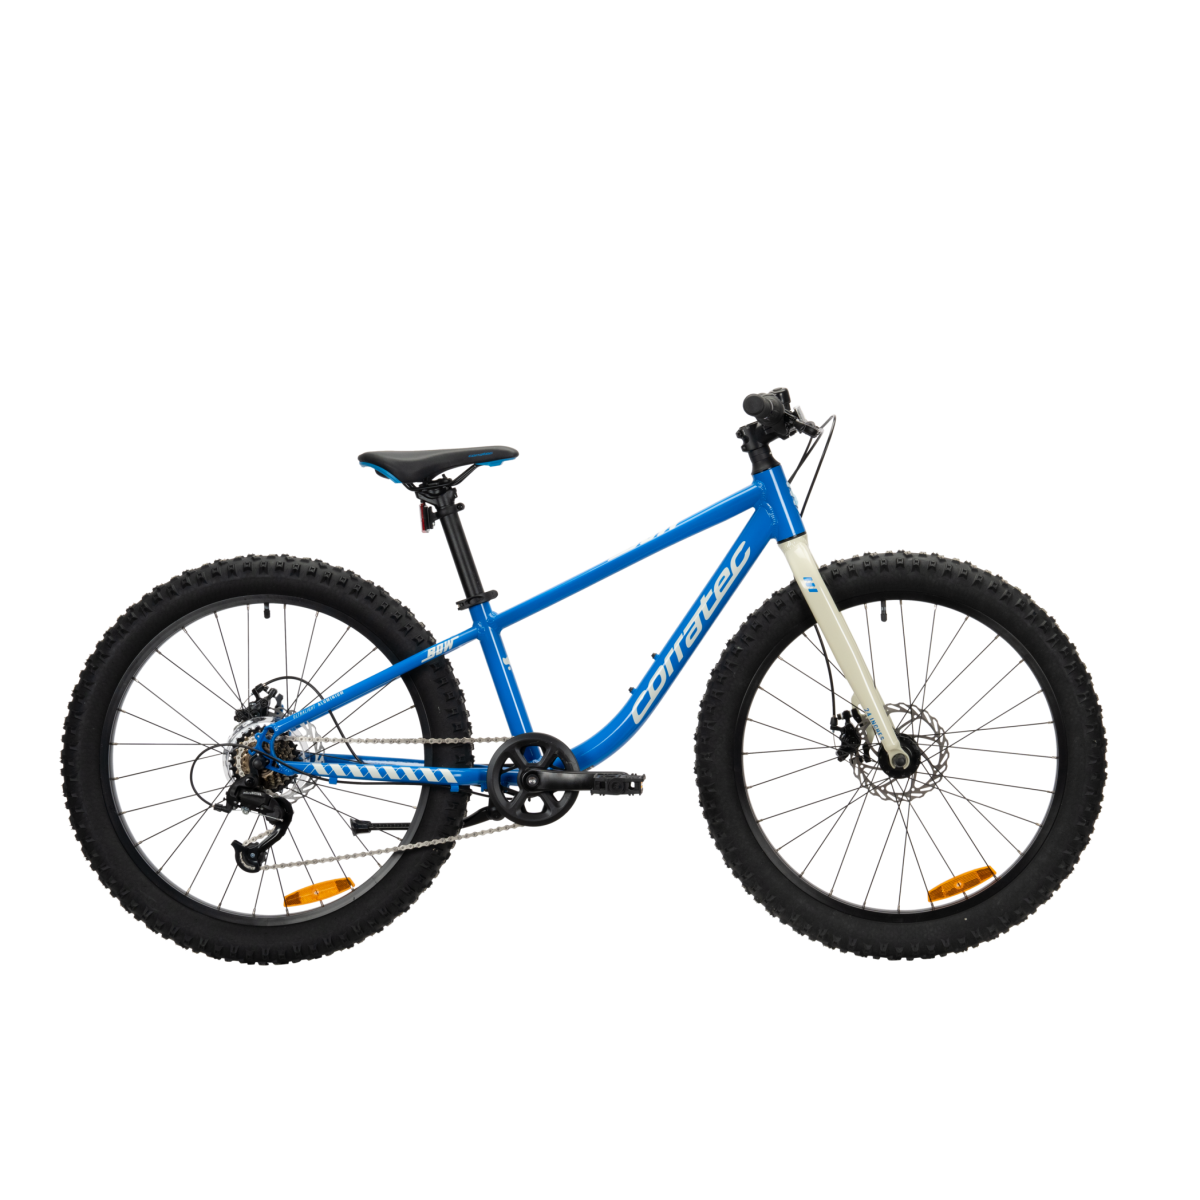 CORRATEC BOW 24 kids bicycle - blue